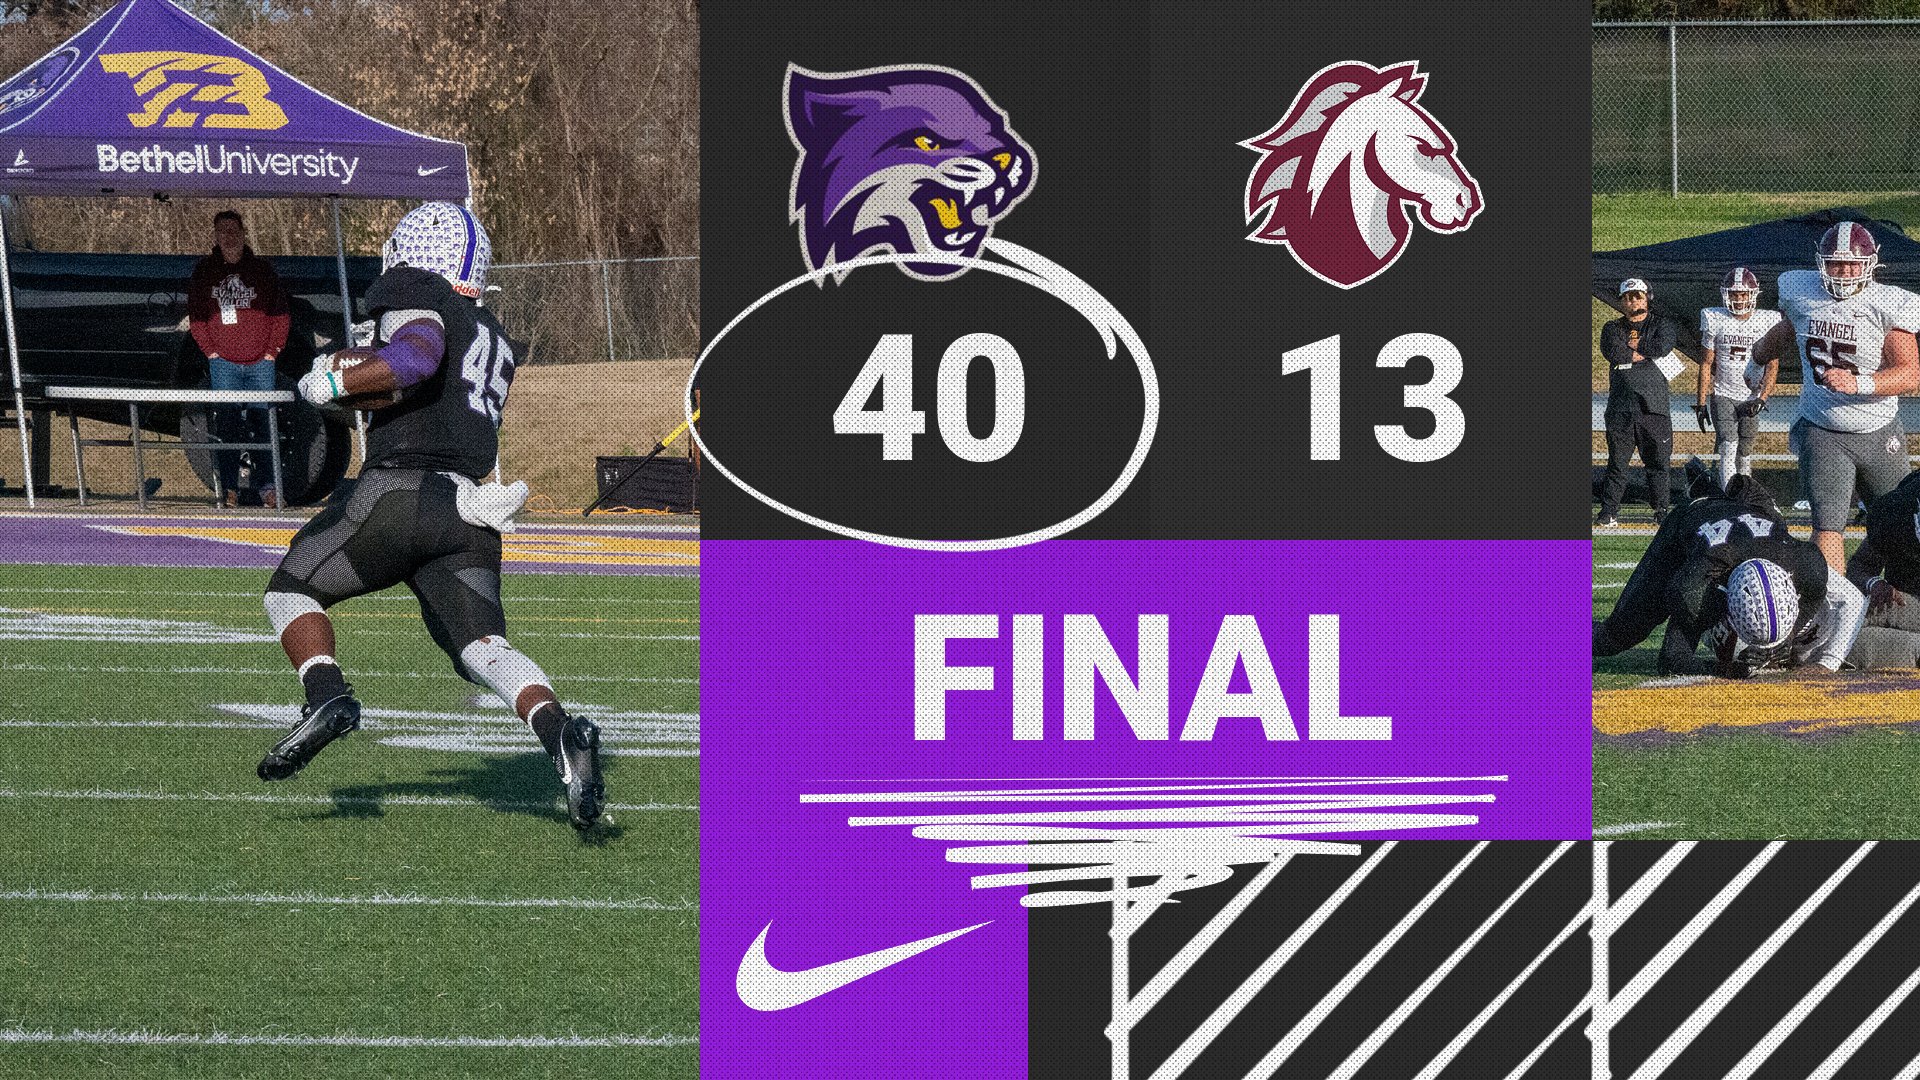 No. 7 Wildcats Advance to NAIA Quarterfinals with 40-13 Win over No. 9 Evangel